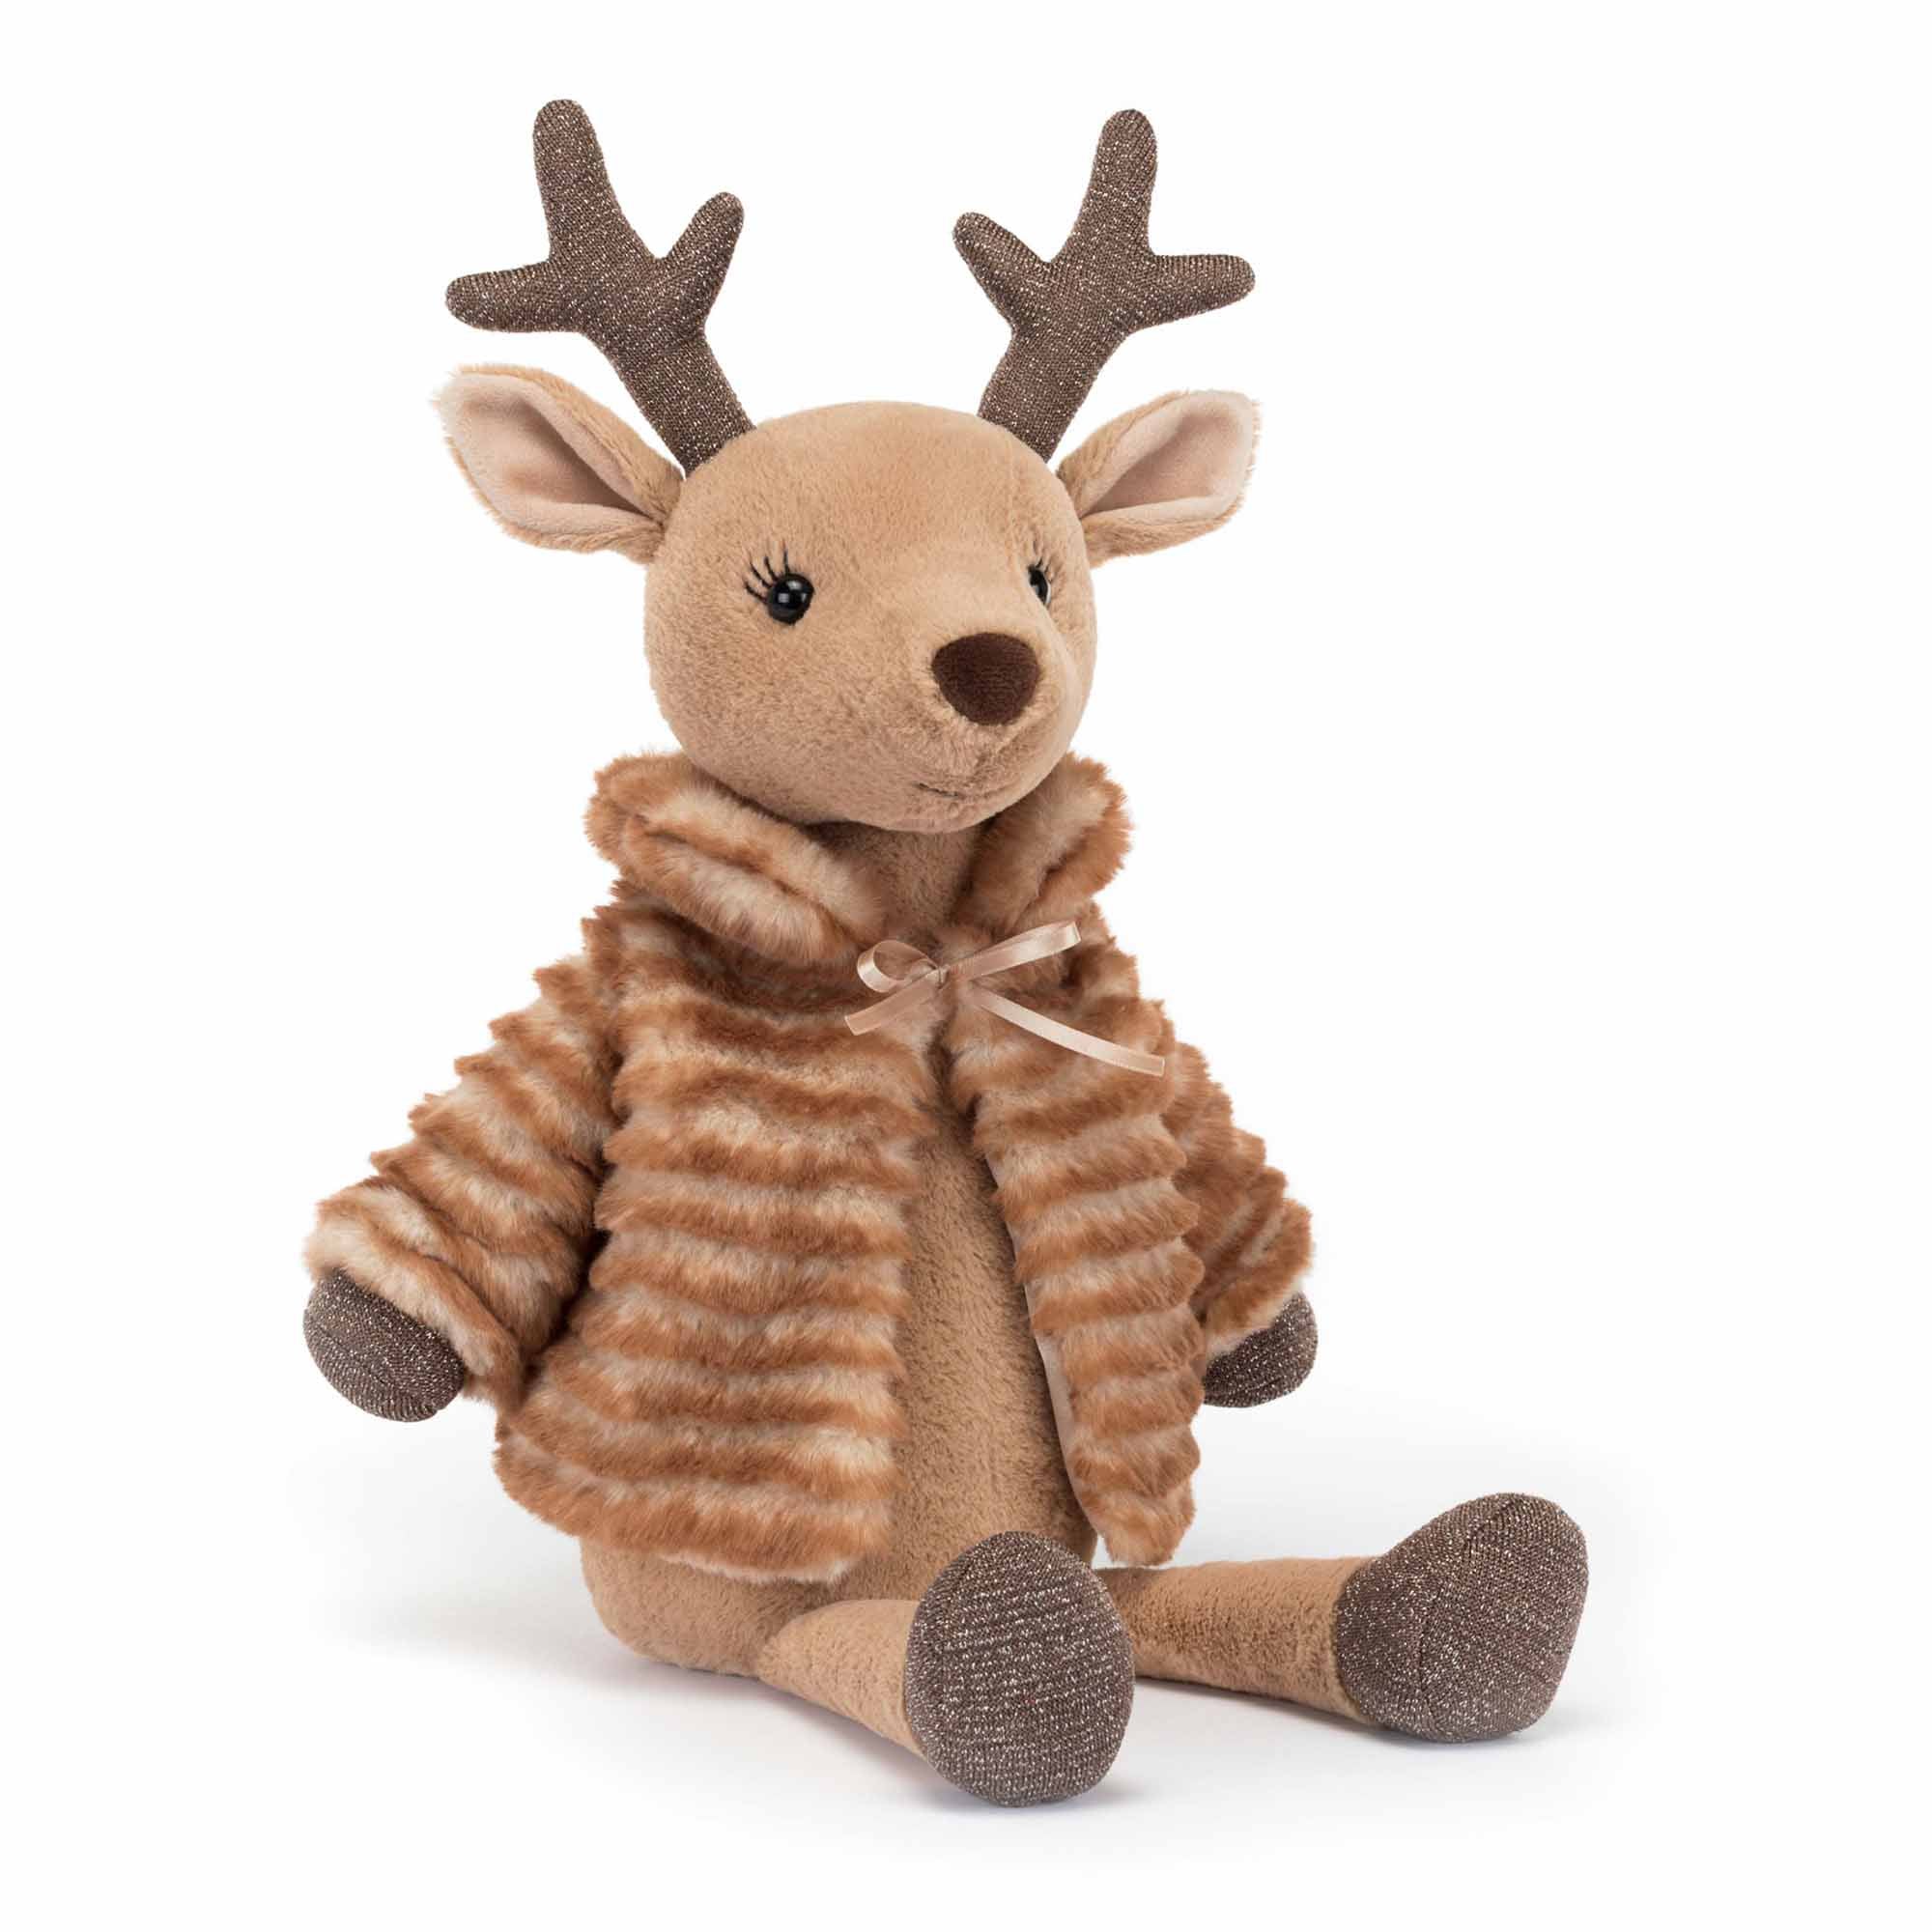 jellycat sophia reindeer with sparkly antlers and hooves dressed in a soft fur coat